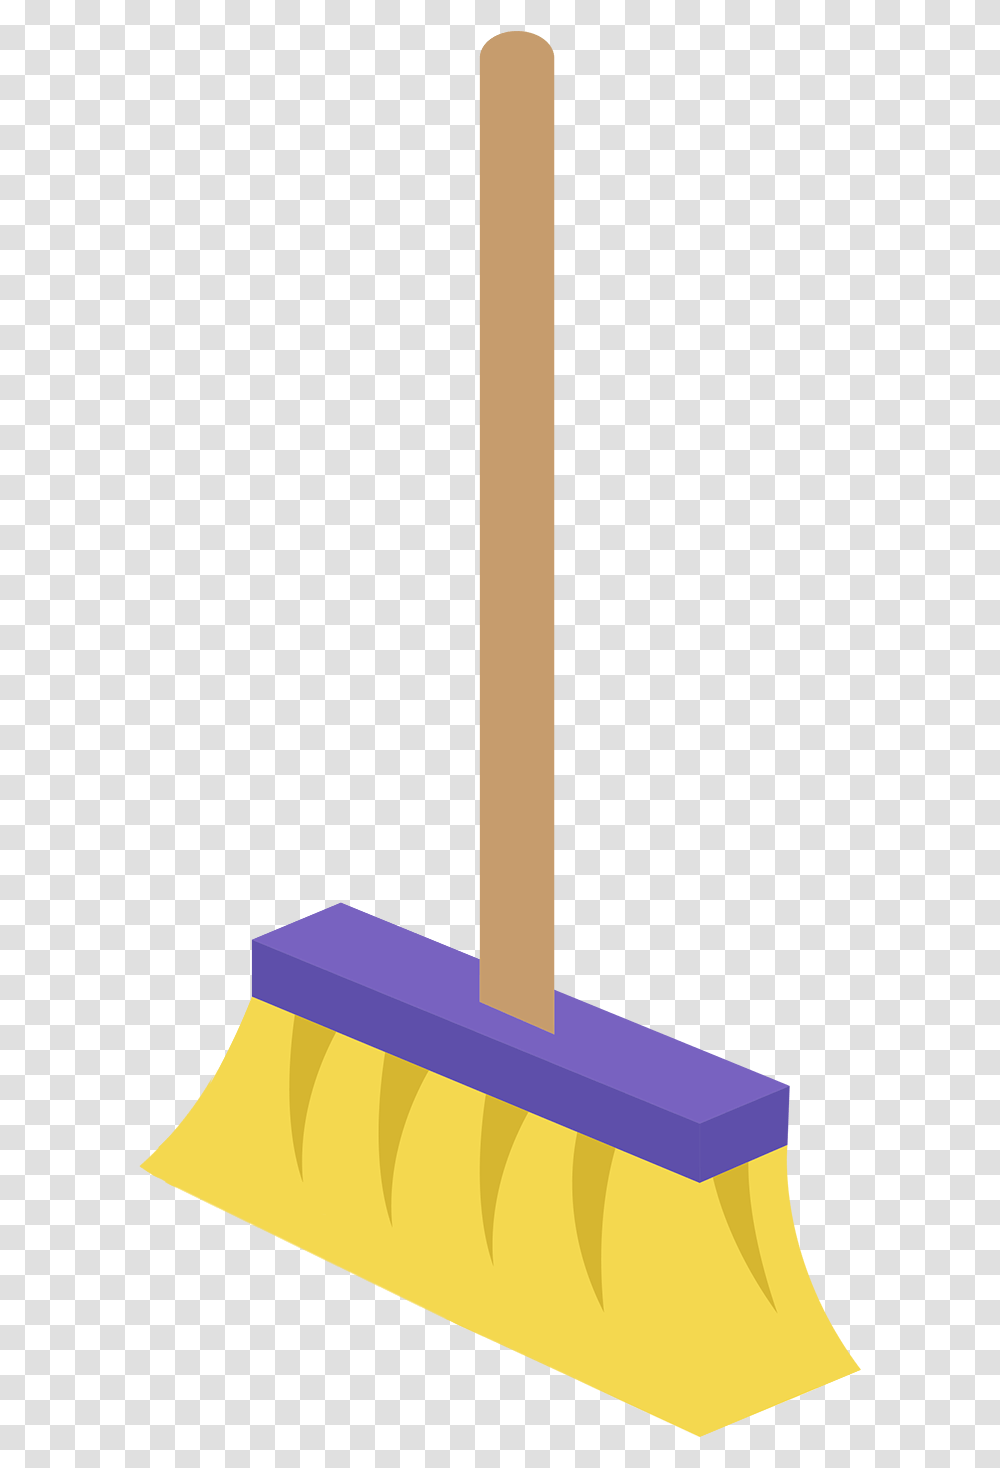 Cleaning Five Star Cleaning Scrub Brush, Broom Transparent Png